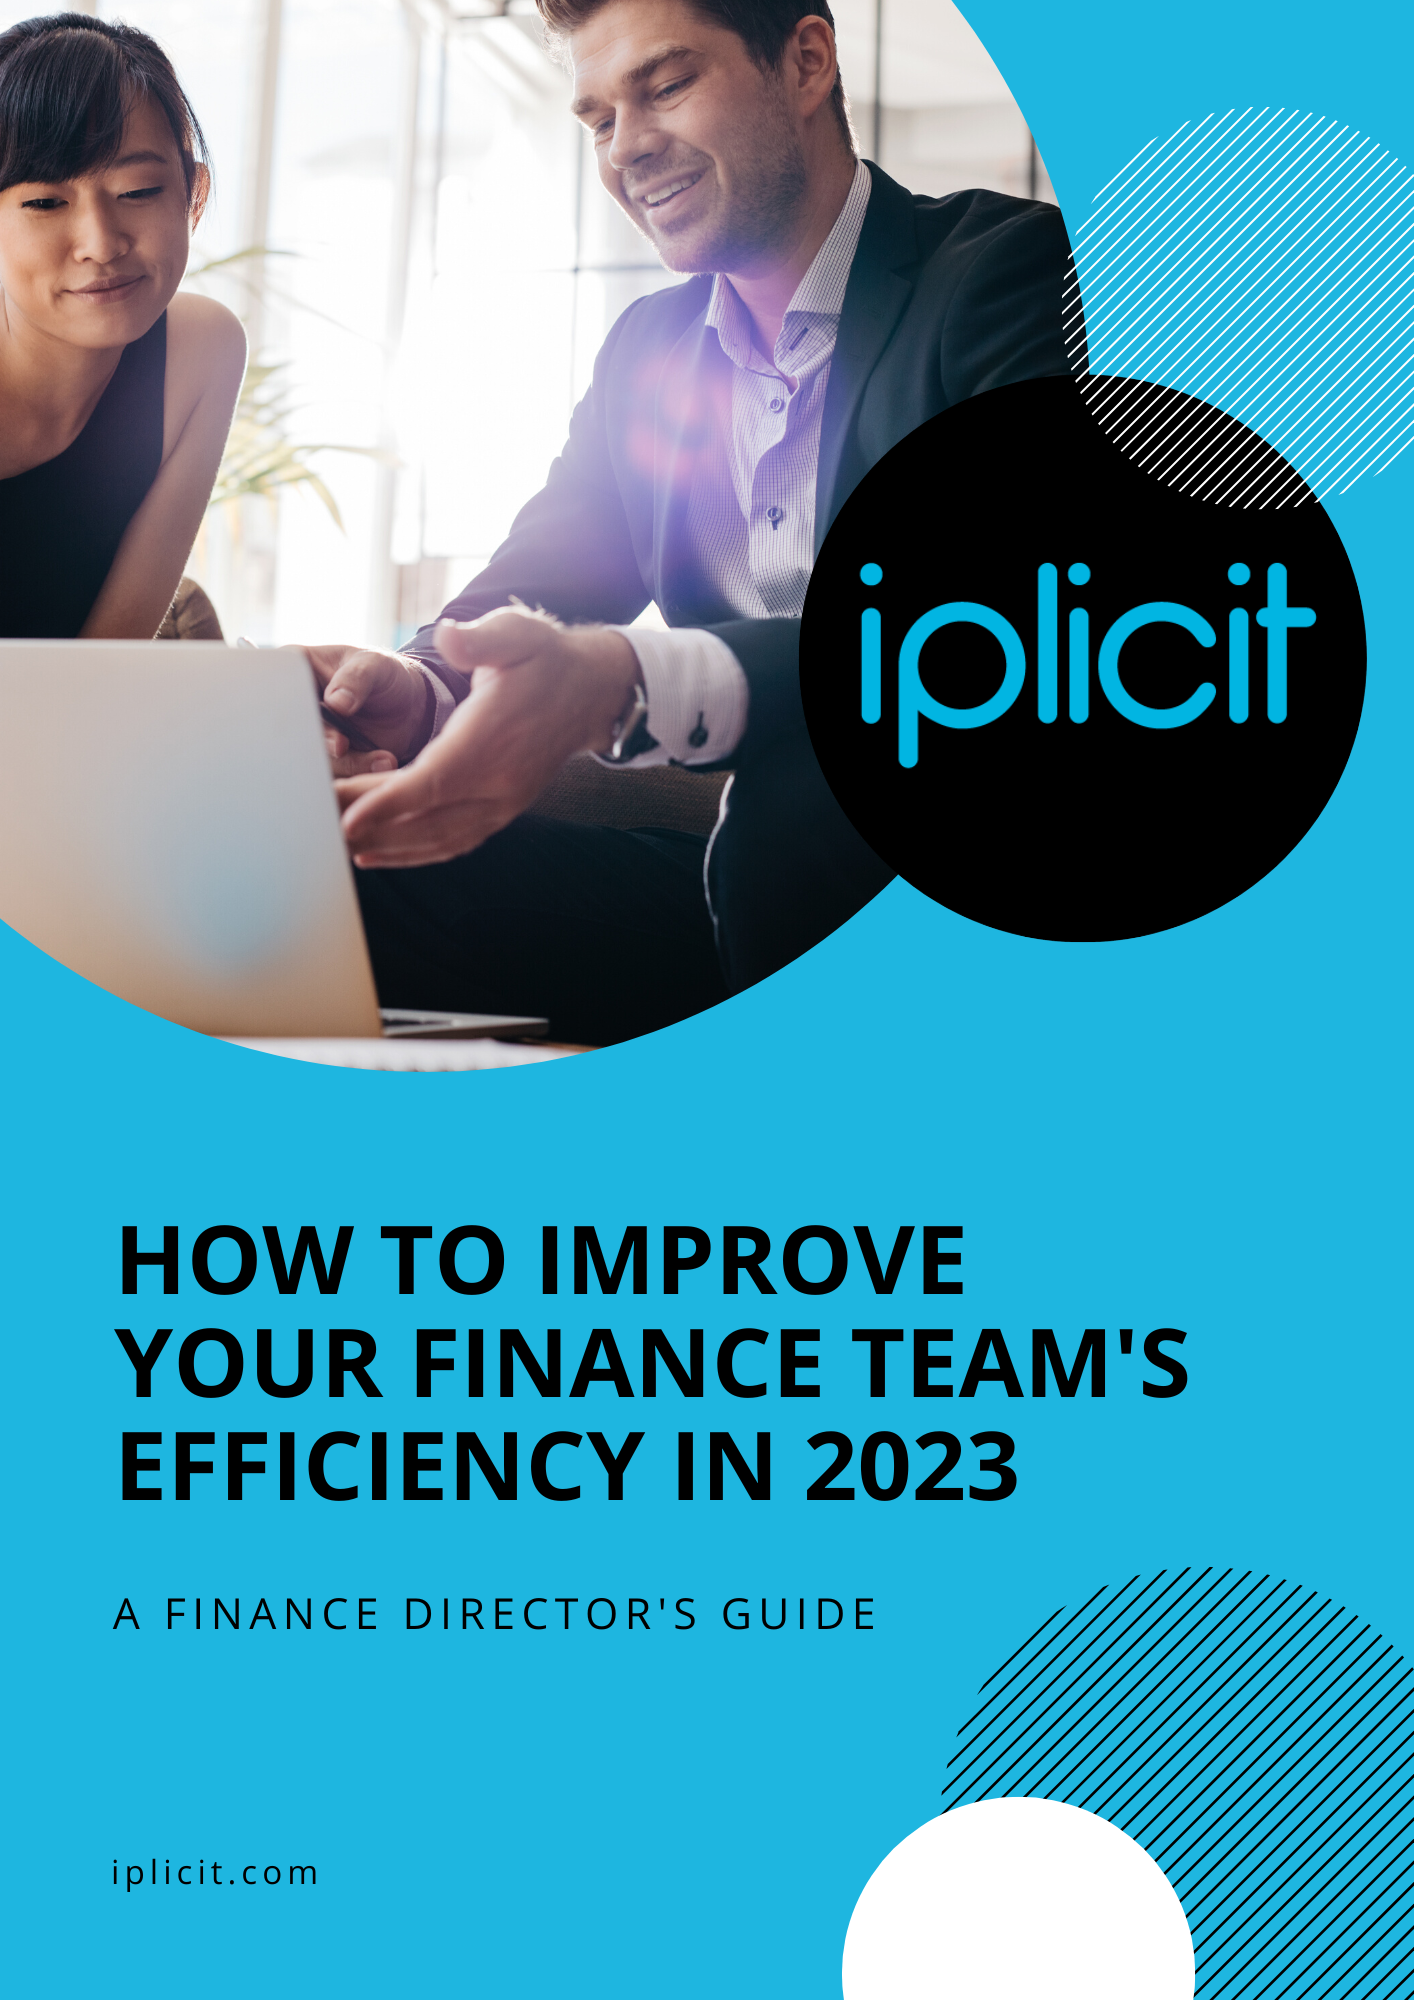 Guide - How to improven your finance teams efficiency in 2023